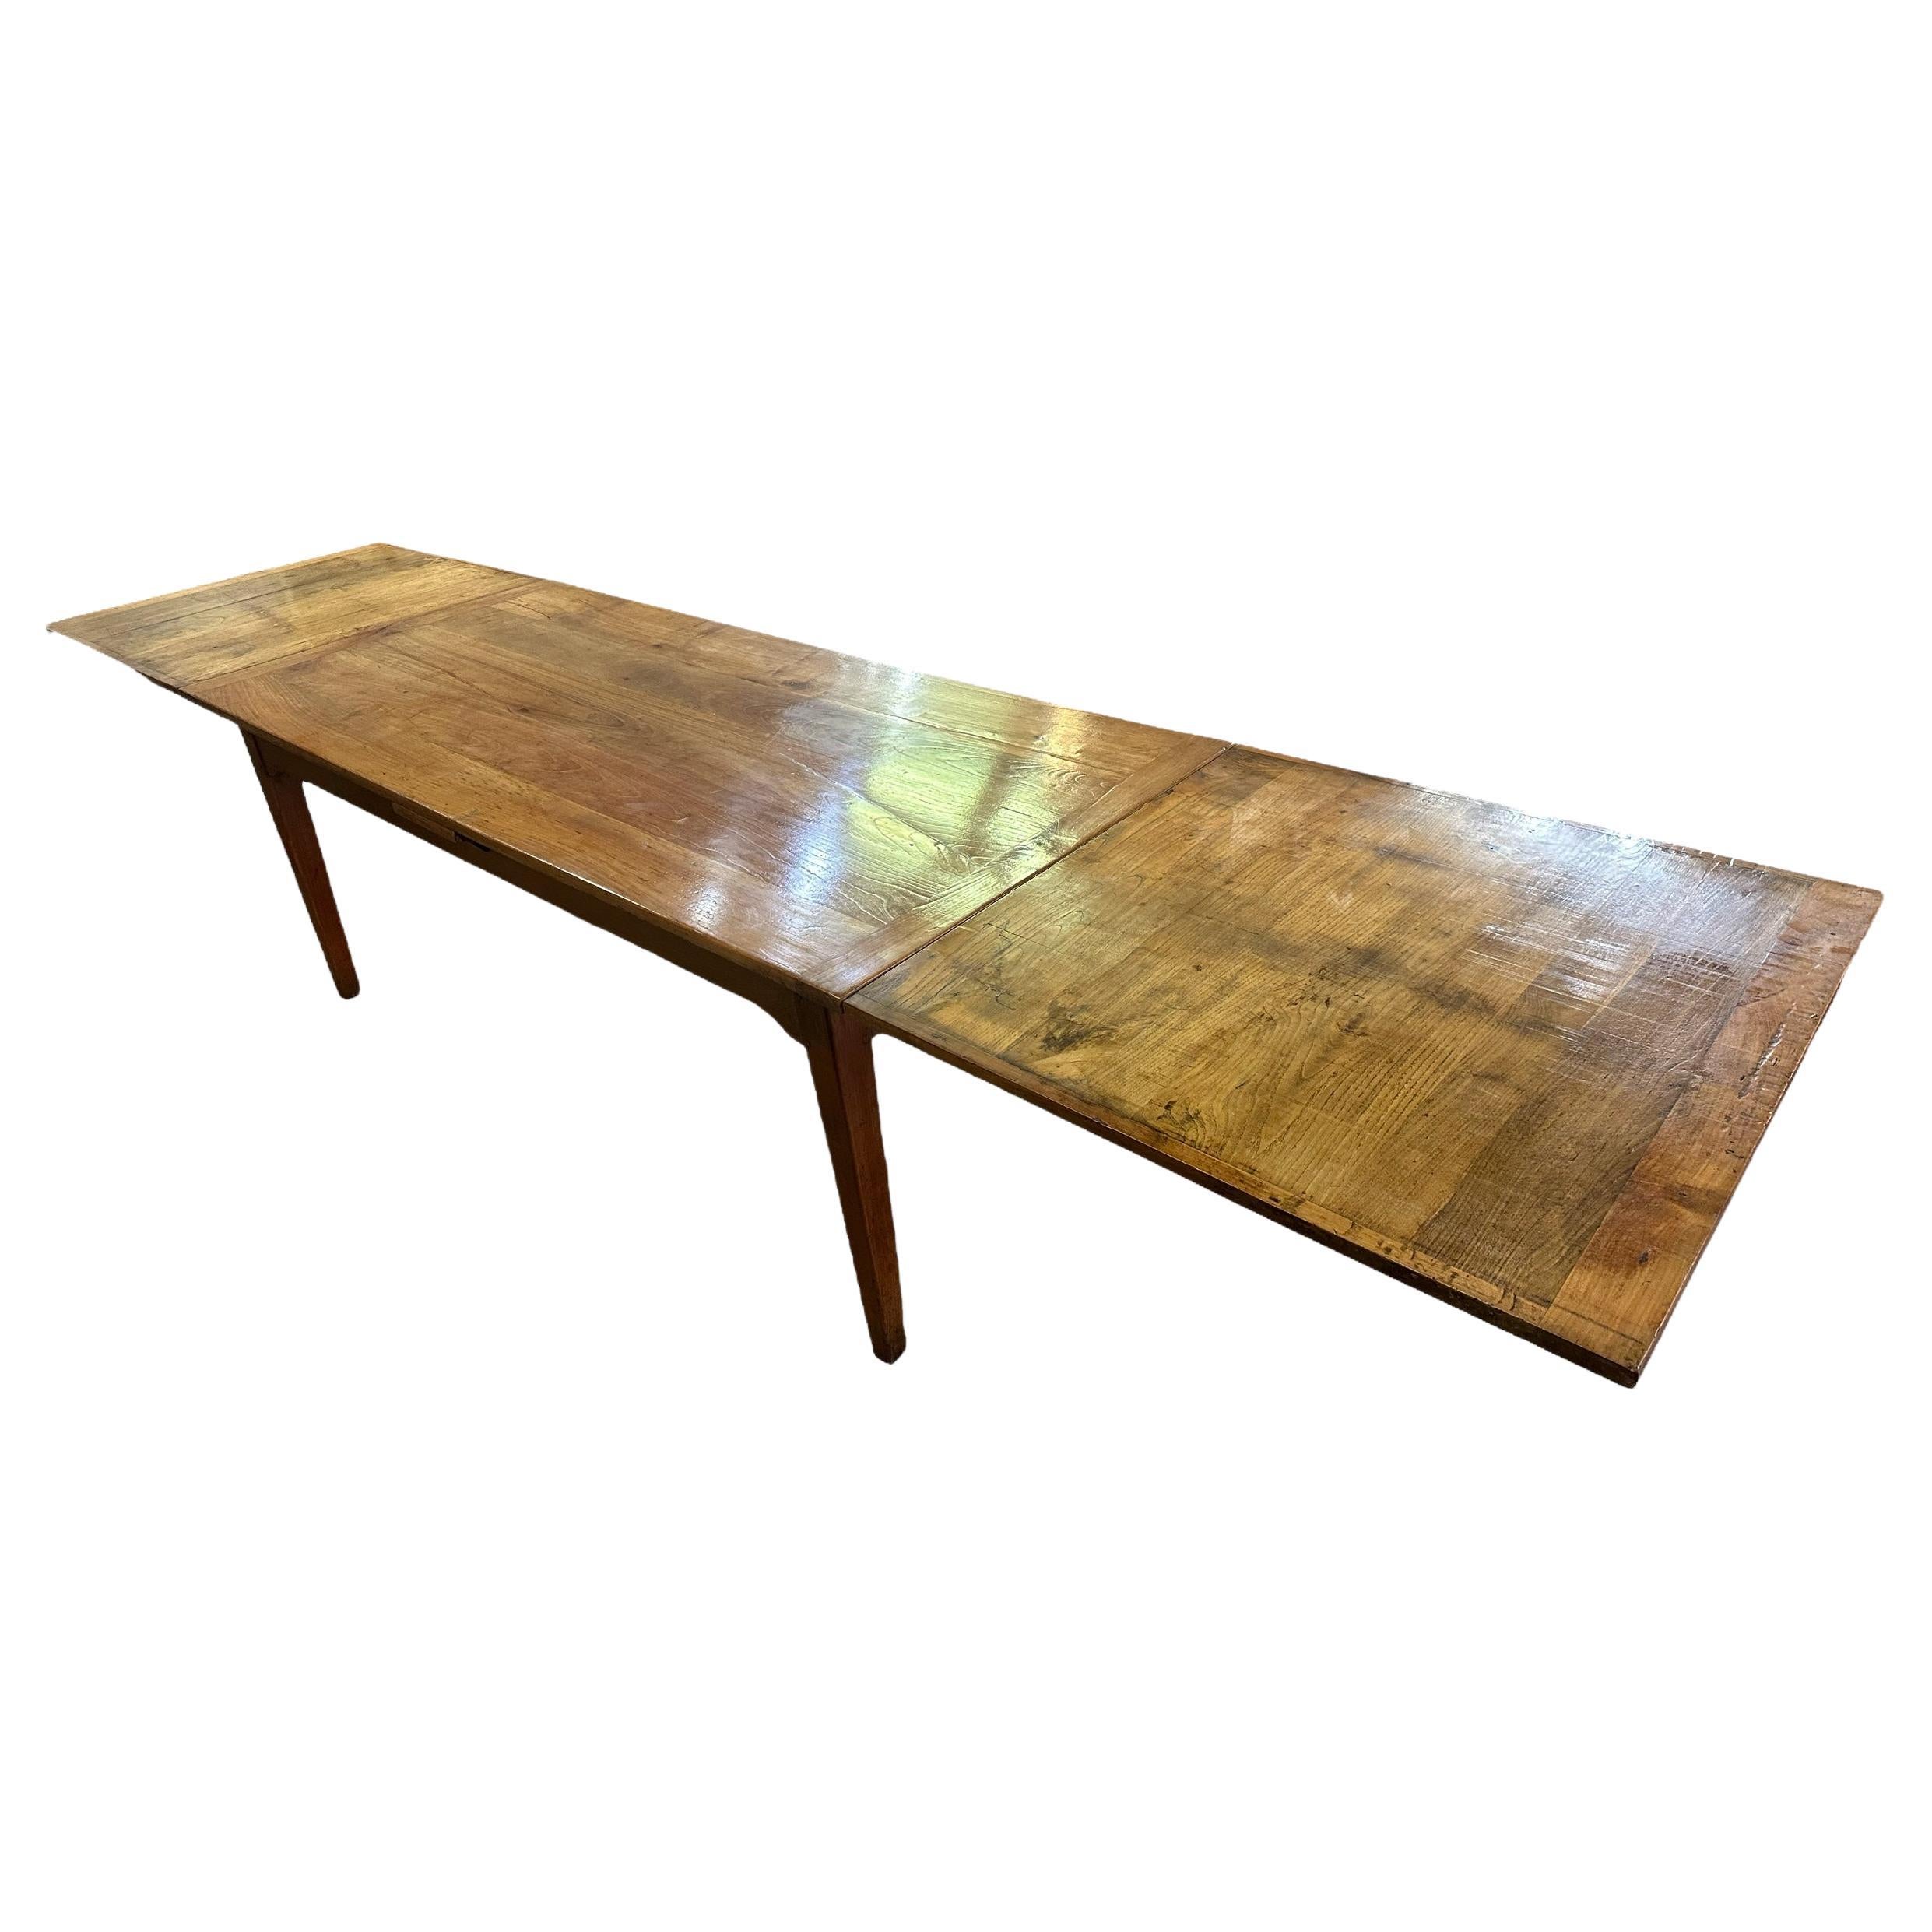 What is a draw leaf dining table?